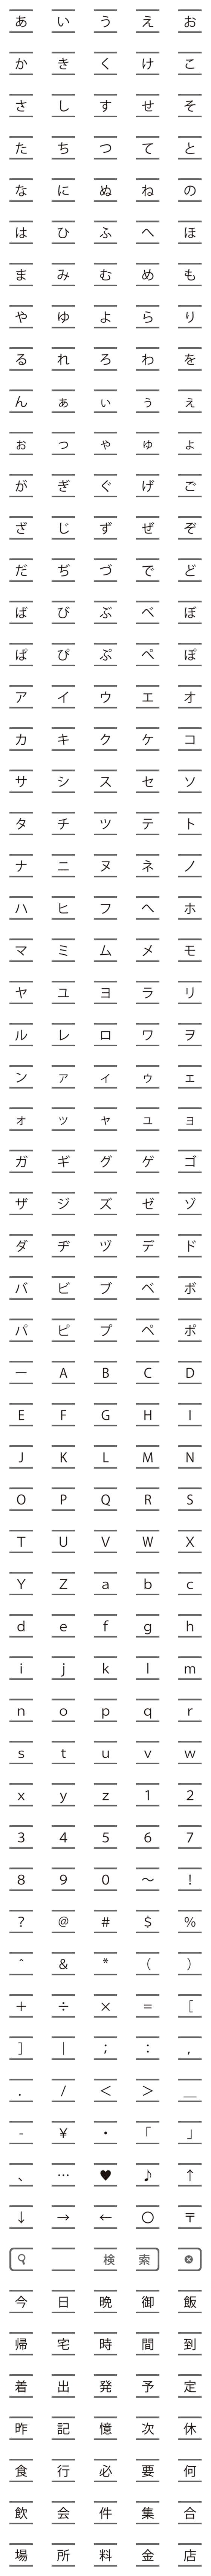 [LINE絵文字]デコ文字で検索の画像一覧